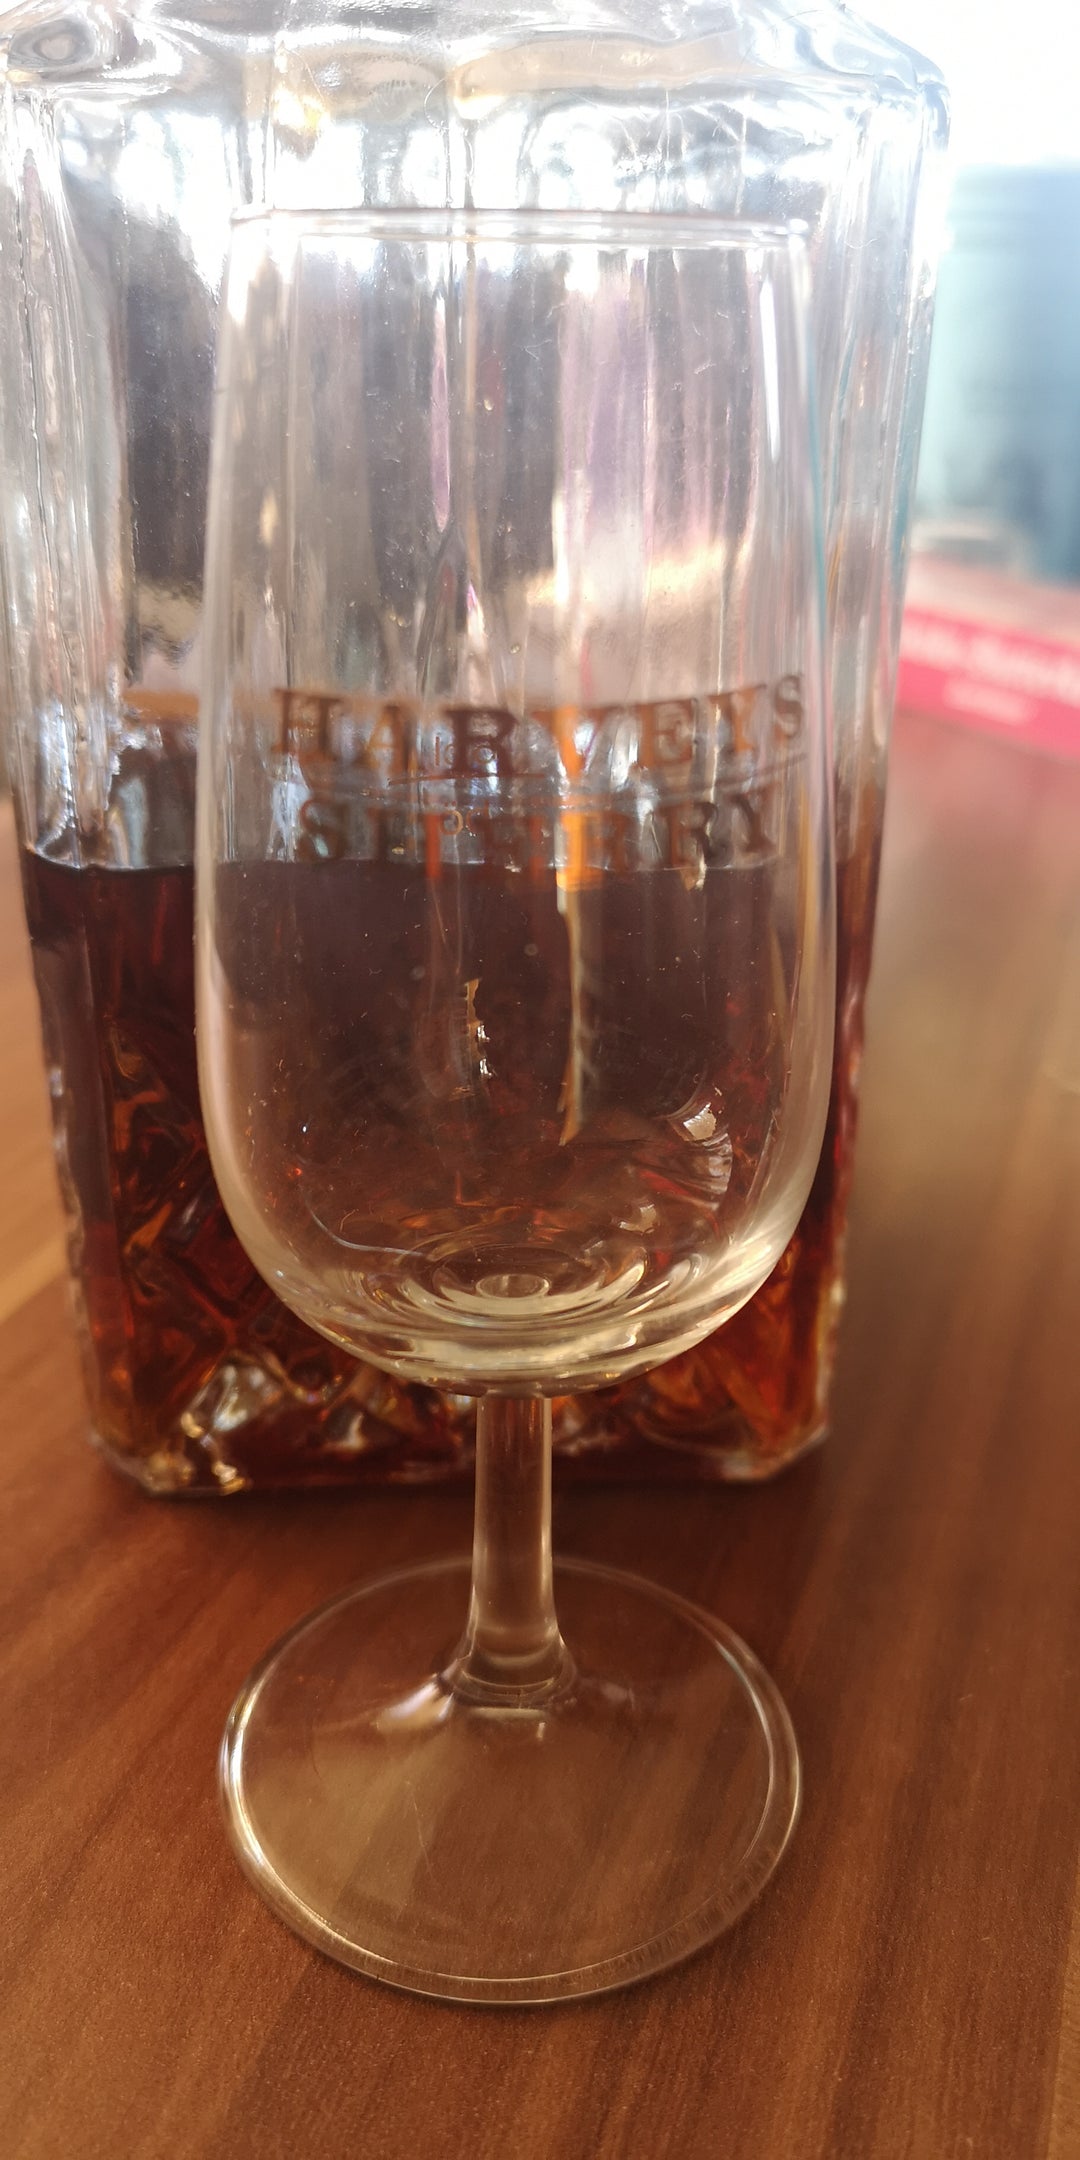 Sherry Glas  mit Beschriftung "Harvey's Sherry" - British Moments